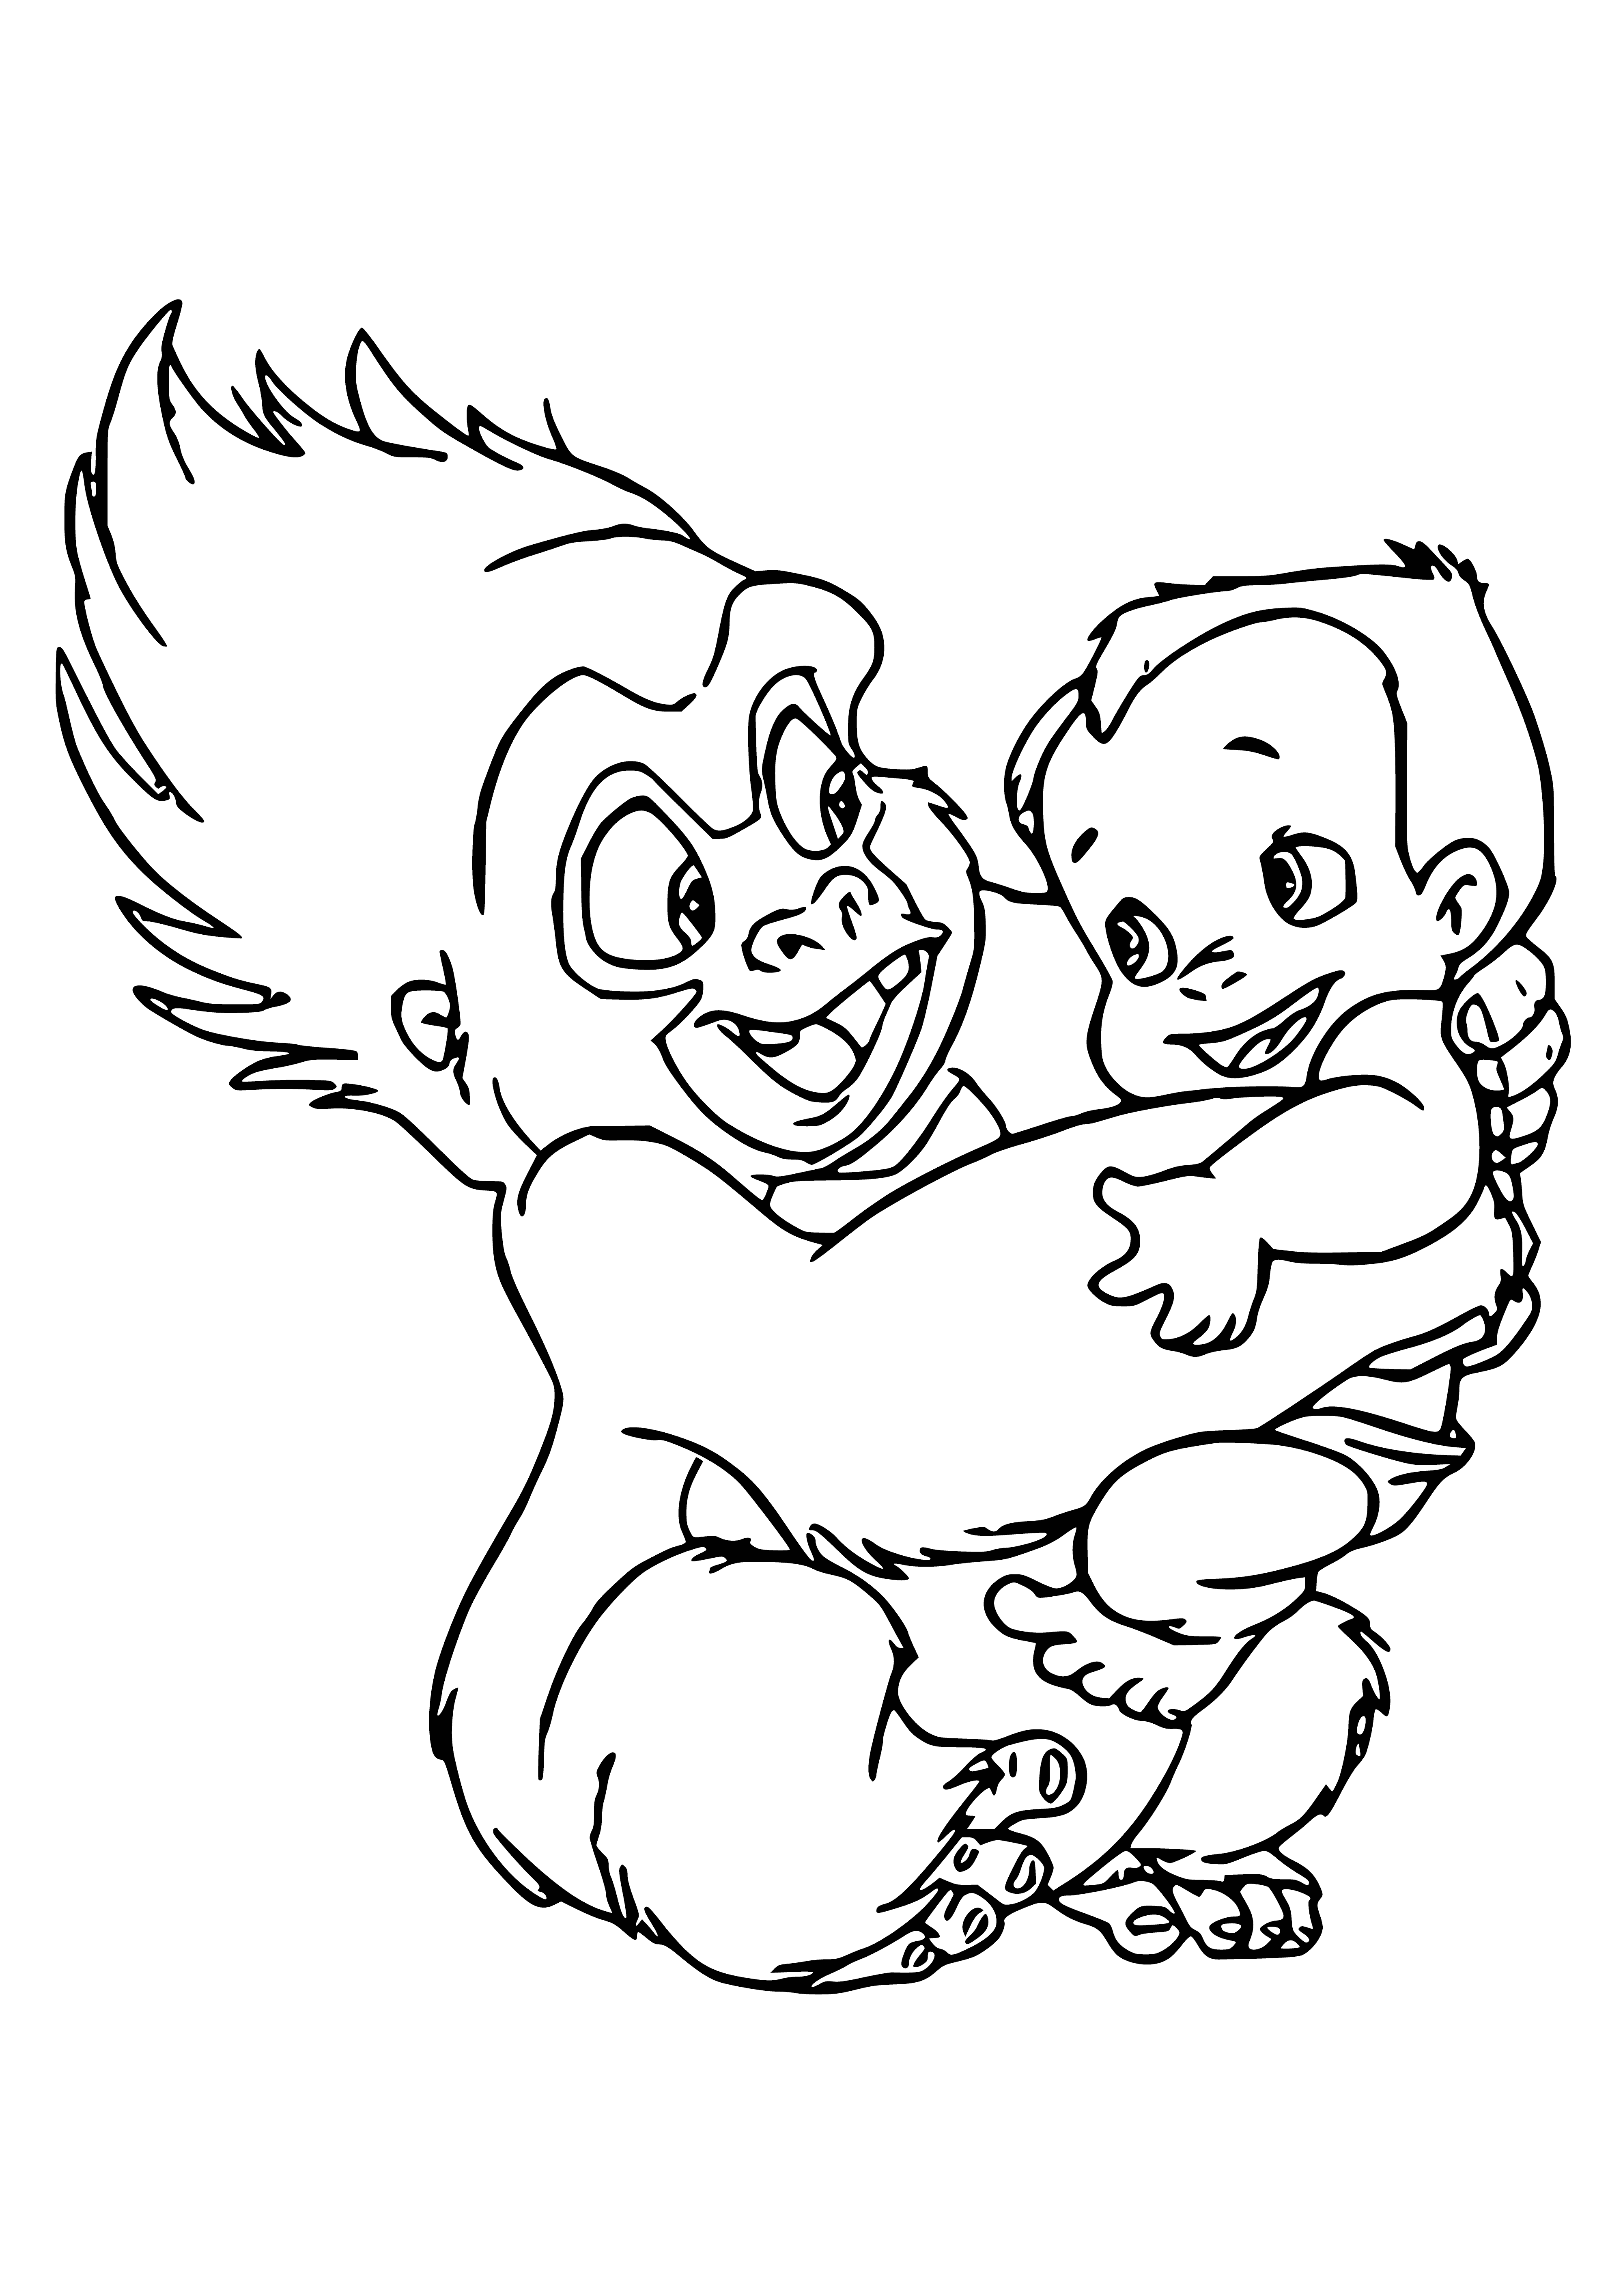 coloring page: Gorilla Turk and baby Tarzan stare into the camera with opened mouths, attempting to communicate.